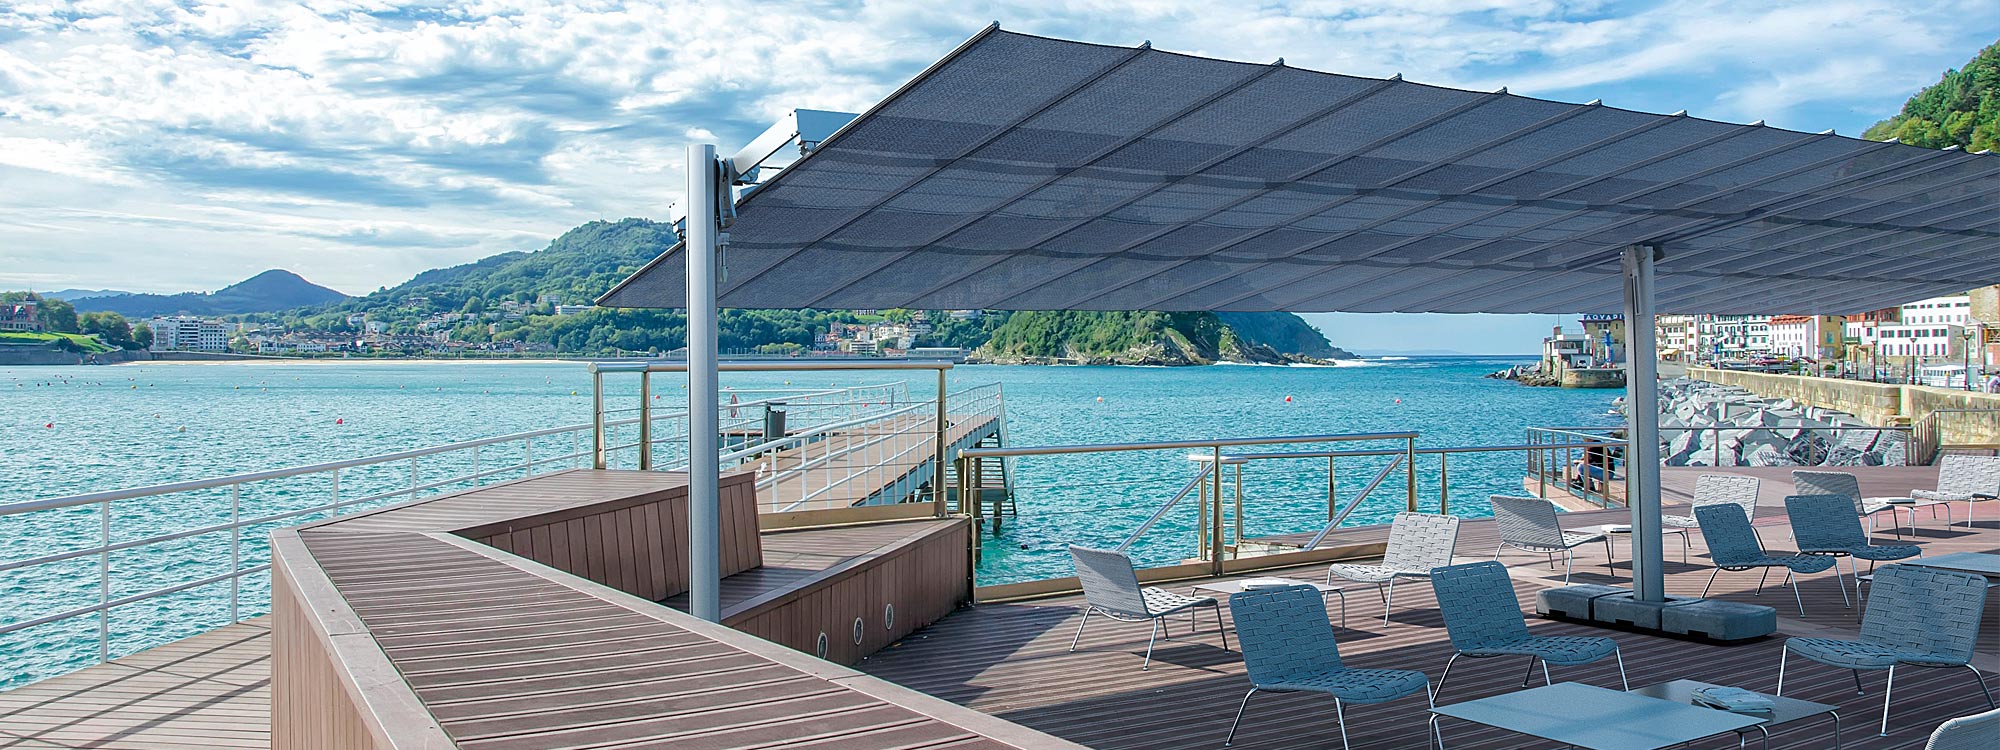 Flexy Large sun awning is a modern freestanding sunshade & retractable sun canopy by Riccardo Giovanetti for FIM luxury quality awning Co.